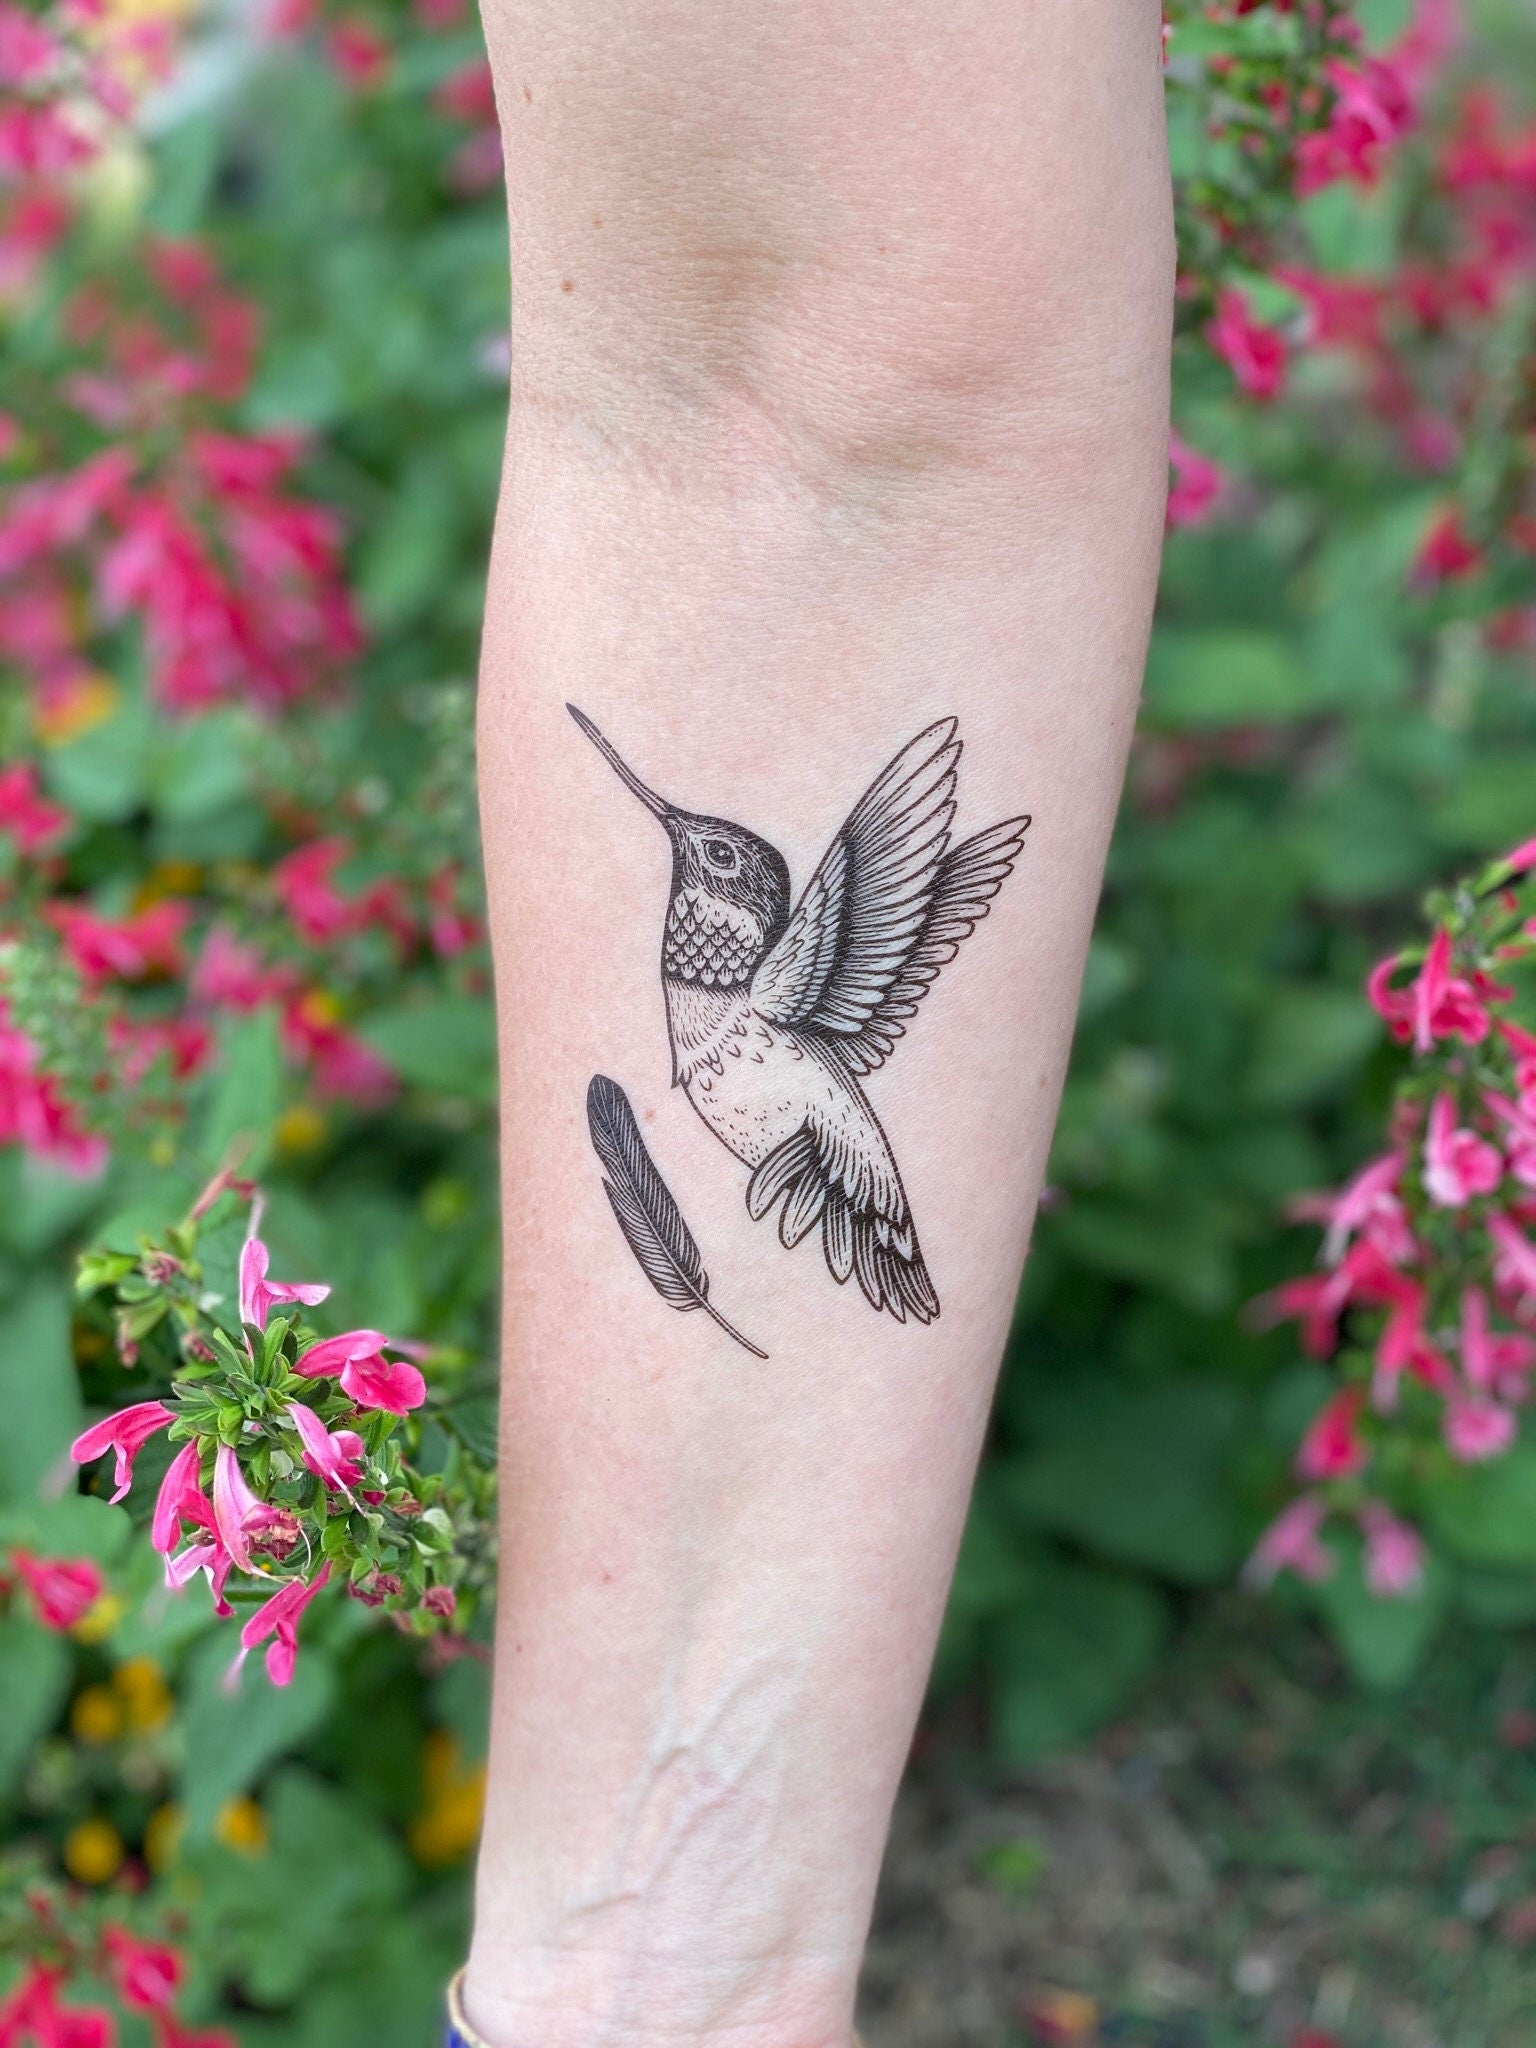 My first tattoo. Watercolour Hummingbird 7.5 years old (sorry no before  photos but I barley notice a difference) : r/agedtattoos